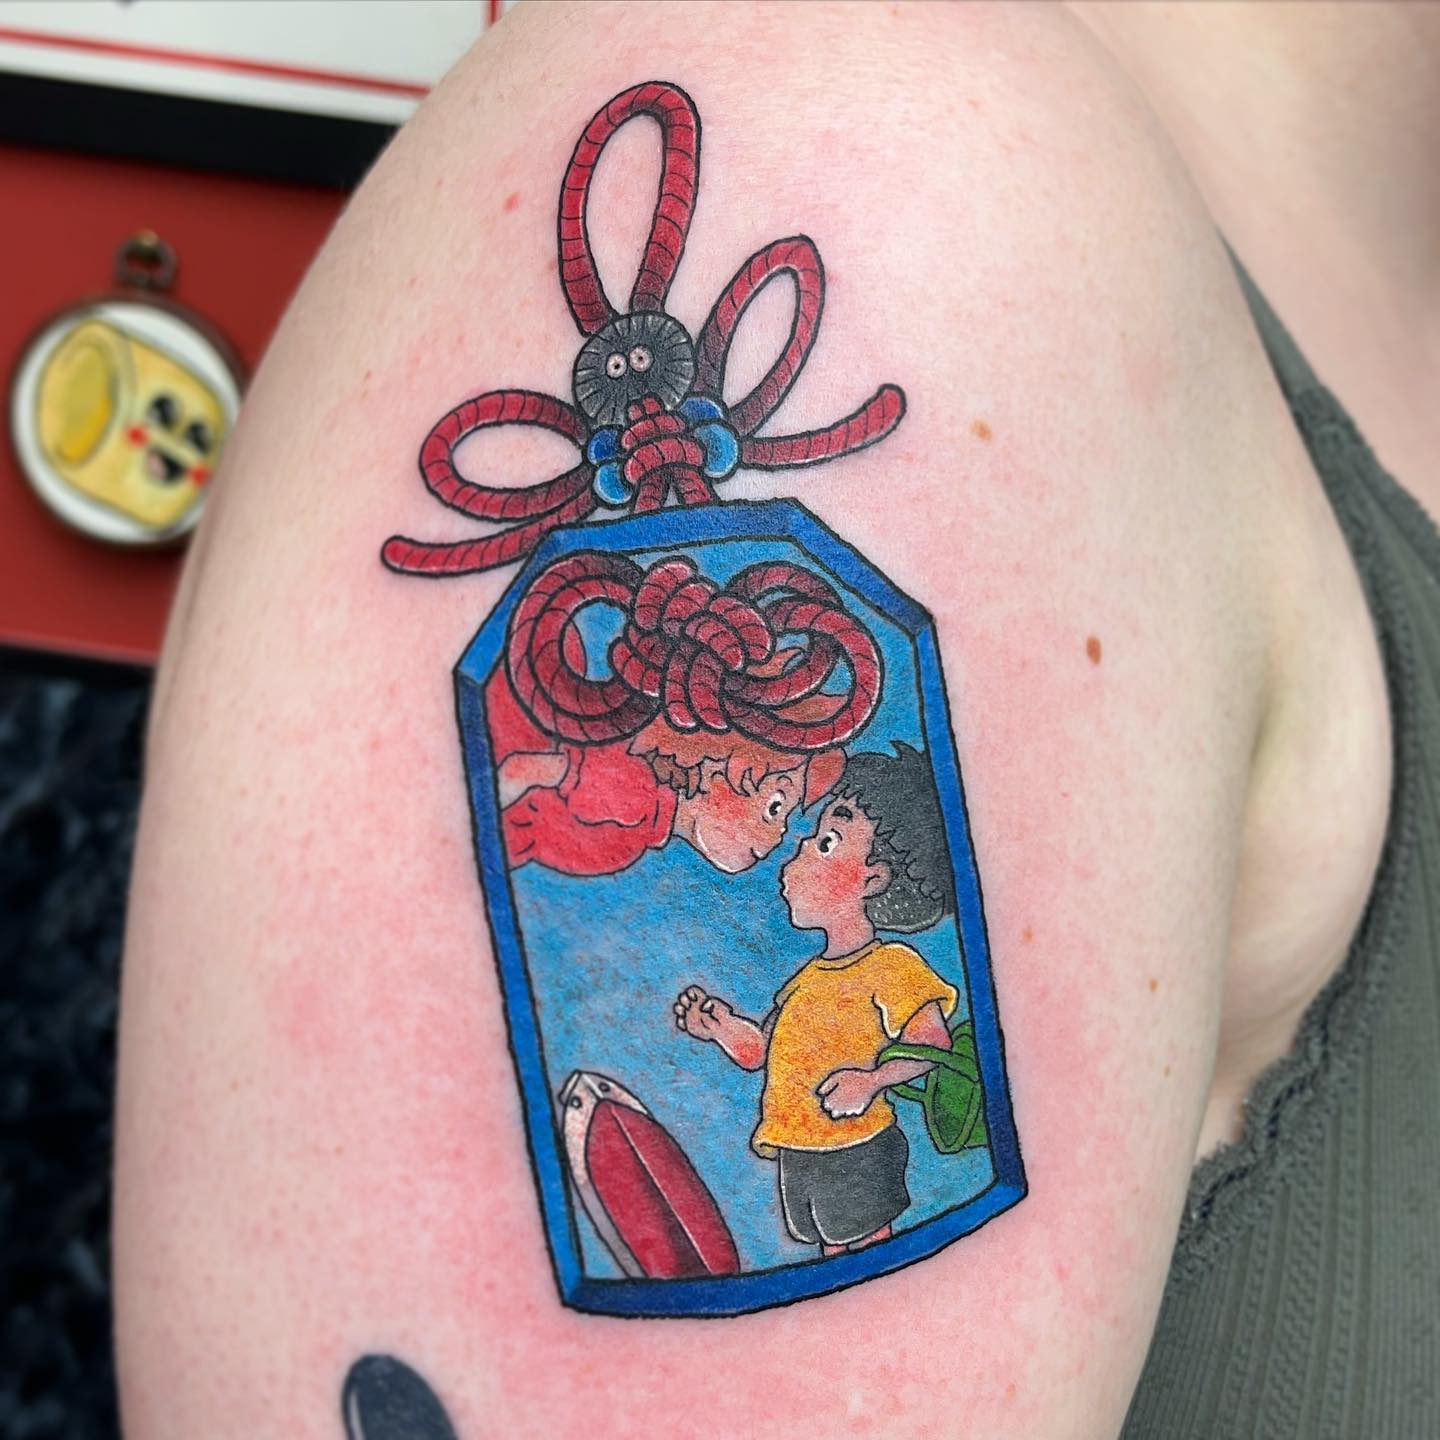 Ponyo Omamori for Emma from my wanna dos. I’m always up for some ghibli and have a bunch of predrawn designs ready to go if you’d like something similar get in touch. 

          